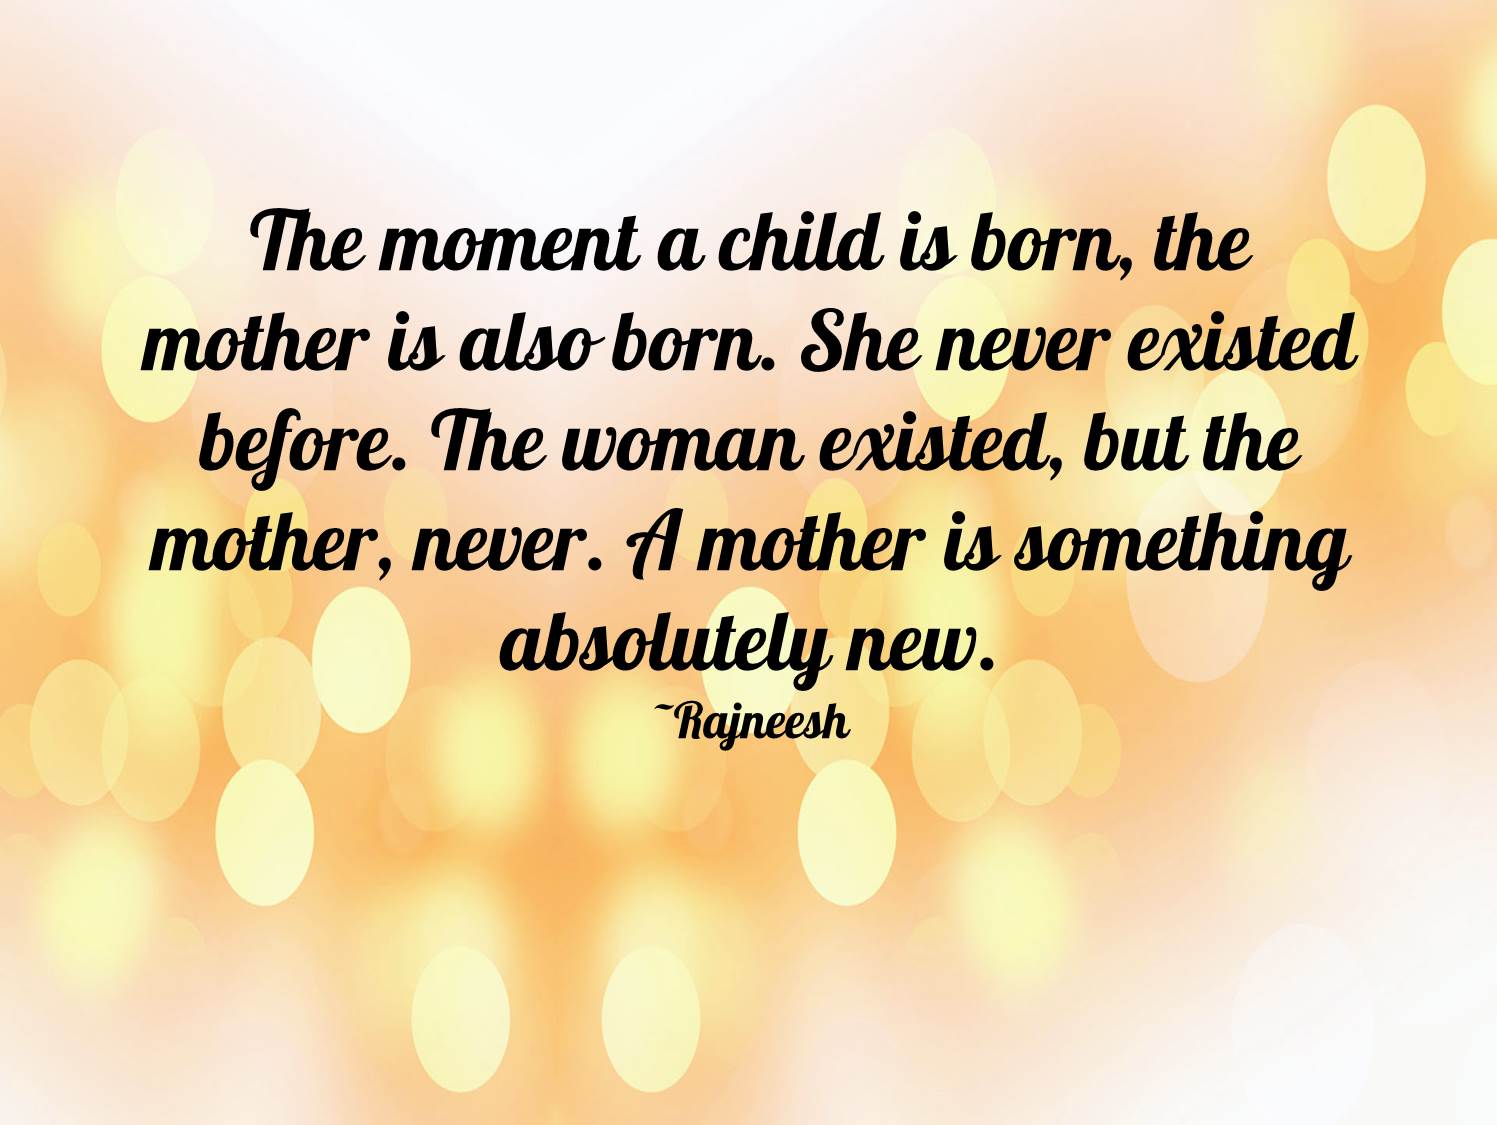 The moment a child is born, the mother is also born. She never existed before. The woman existed, but the mother, never. A mother is something absolutely new. Rajneesh